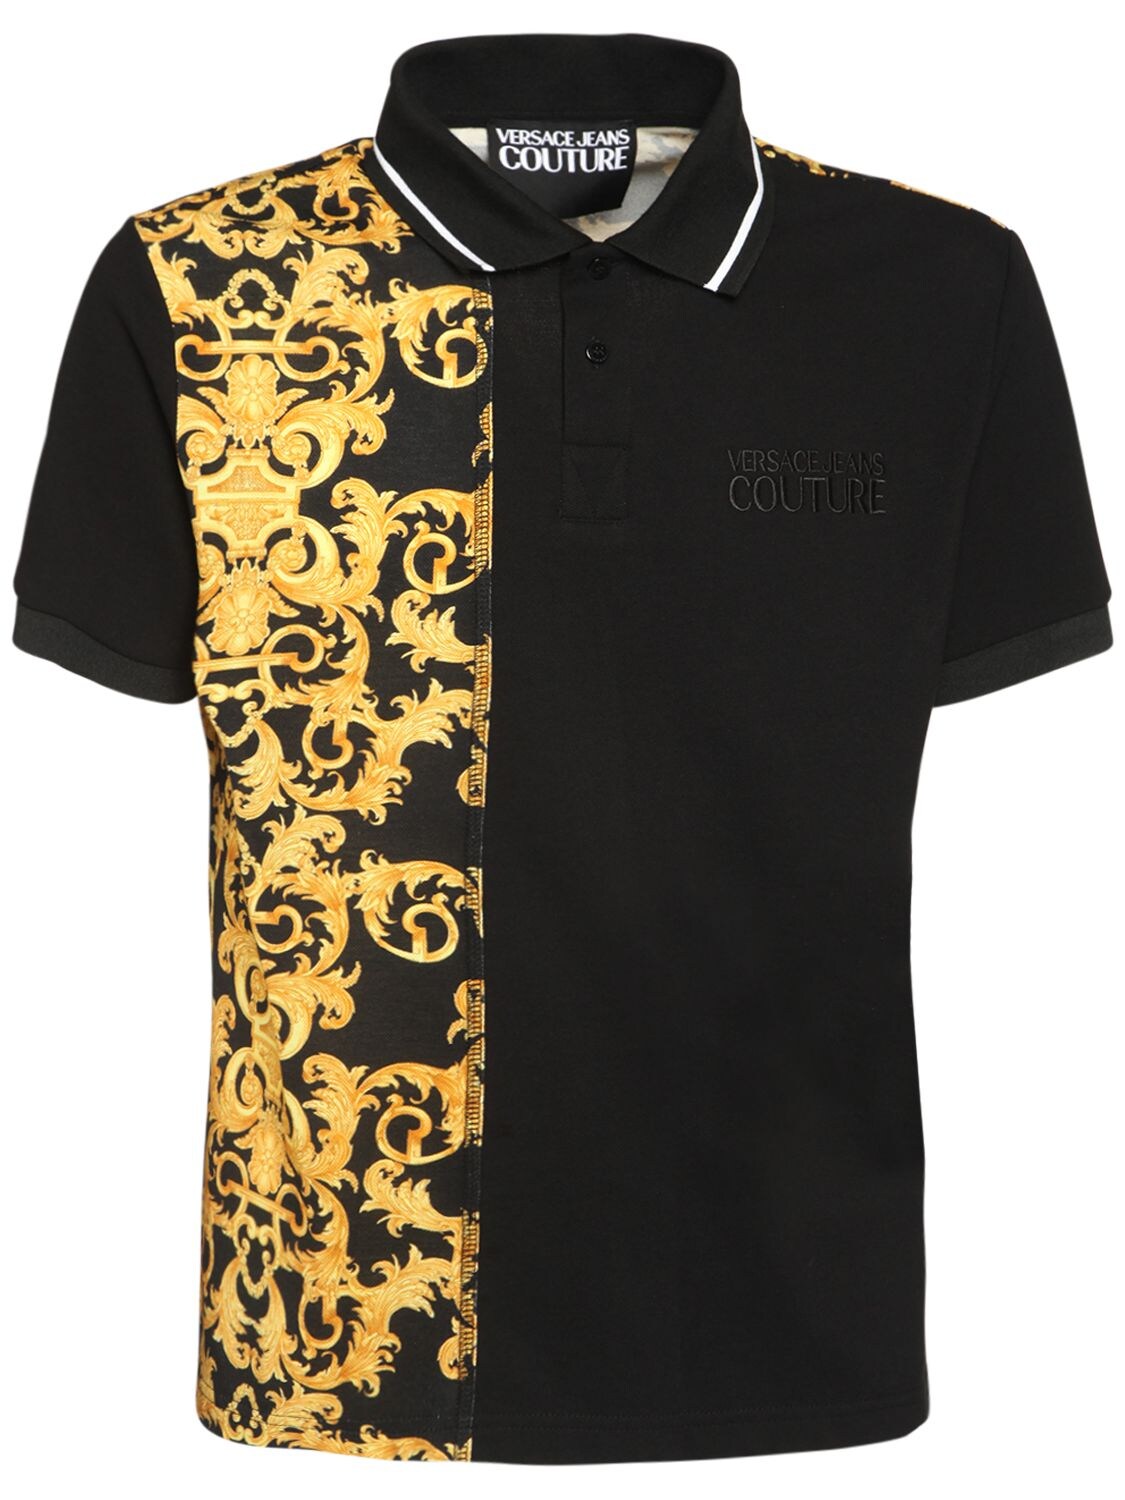 VERSACE JEANS COUTURE TWO TONE LOGO COTTON POLO,73IBQN013-ODK50